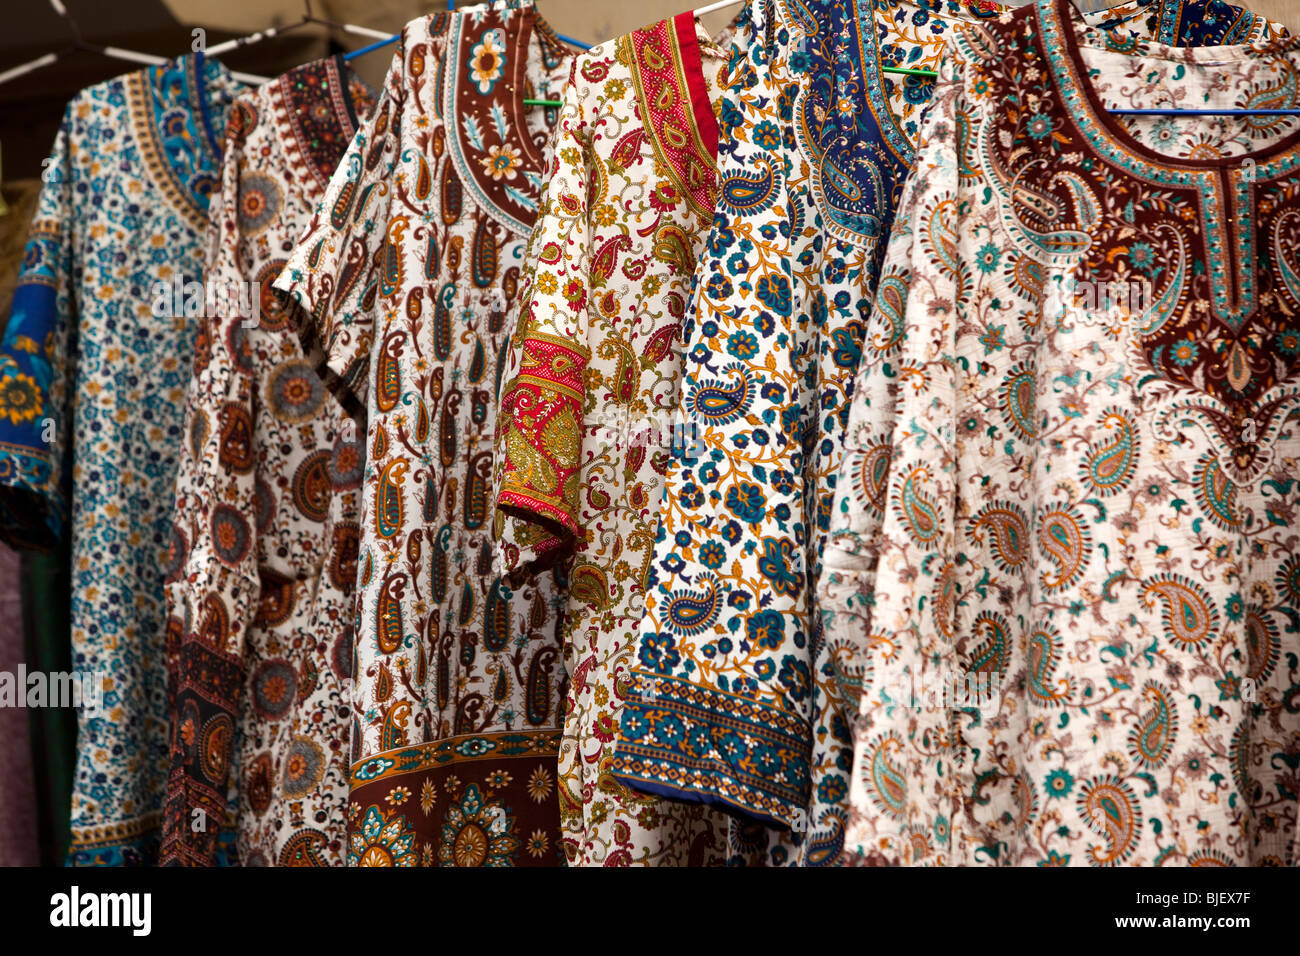 India, Kerala, Kochi, Mattancherry, Jewtown, paisley patterned cothes on display in tourist shop Stock Photo